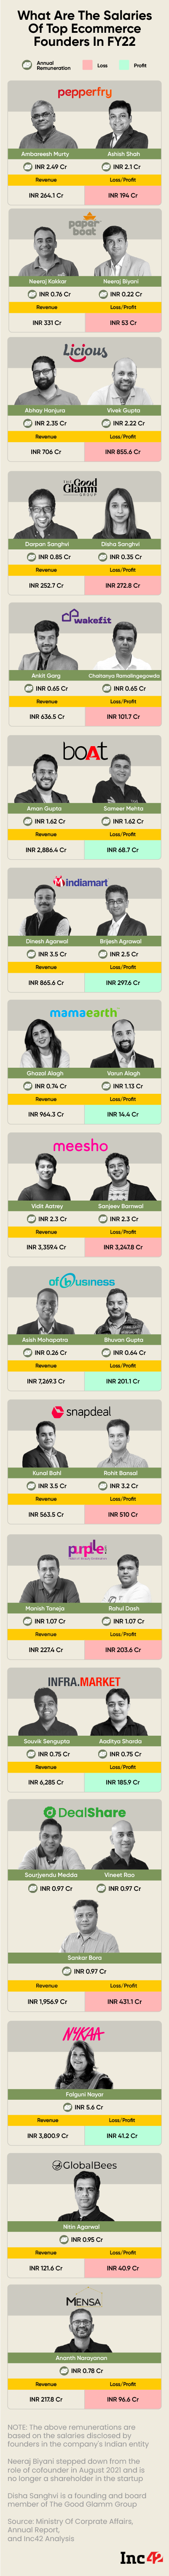 How Much Were India’s Top Ecommerce Founders Paid In FY22